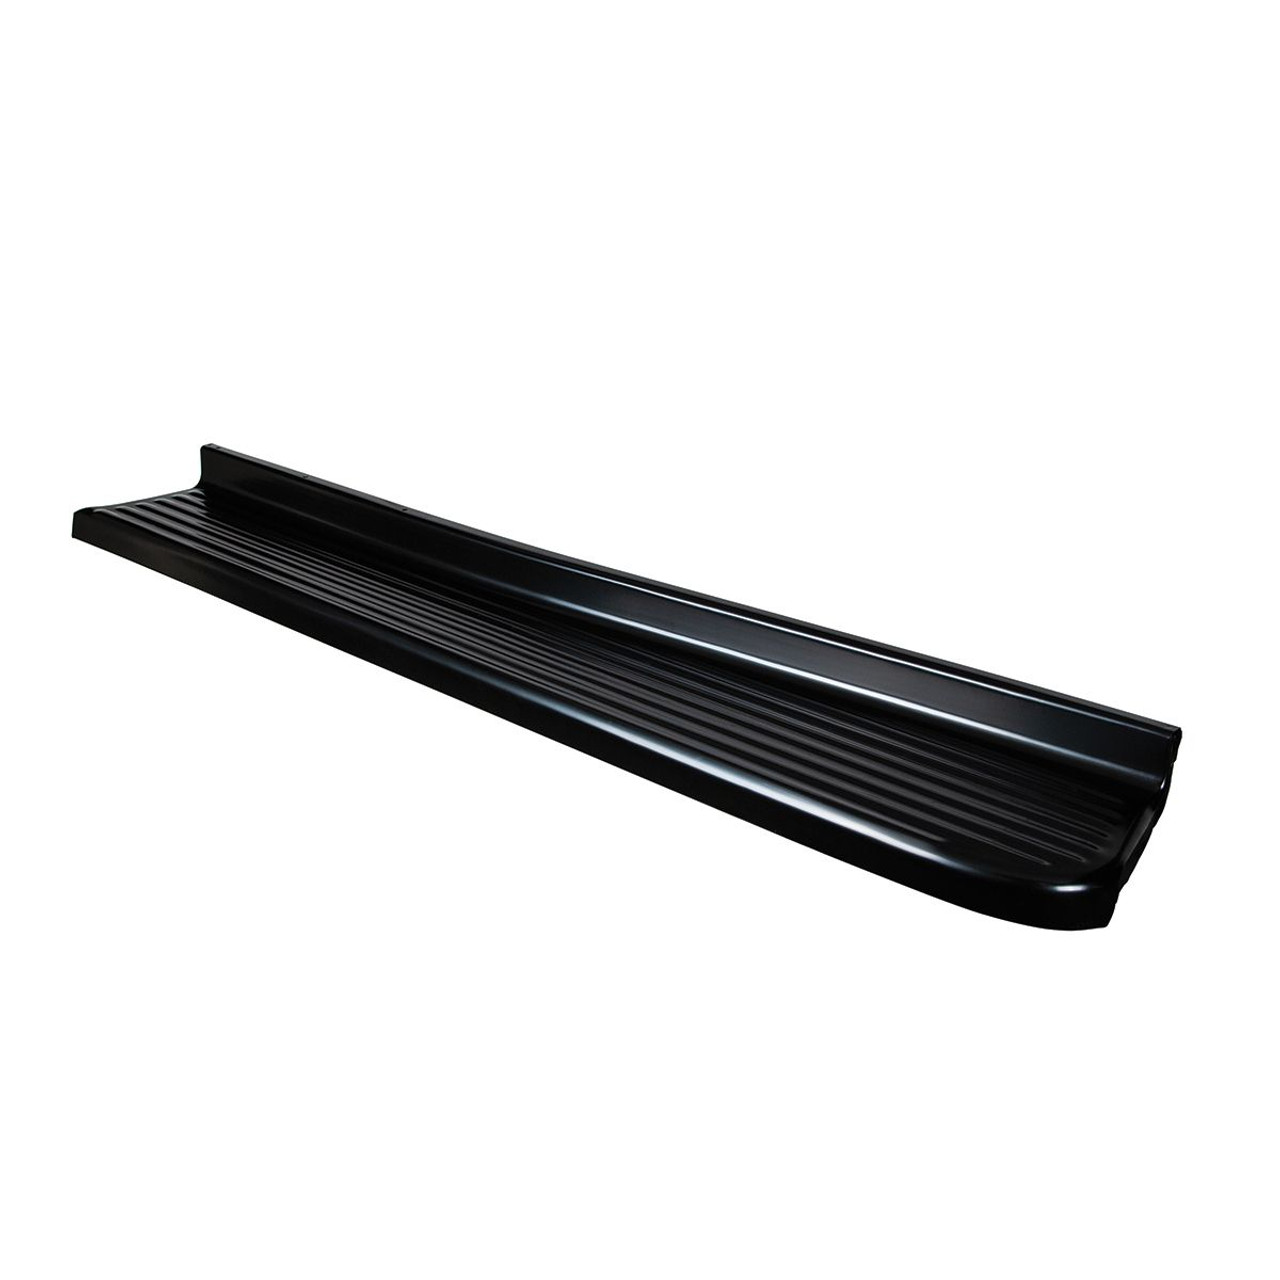 United Pacific Black Painted Running Board for 1947-54 Chevy & GMC Shortbed Truck - R/H